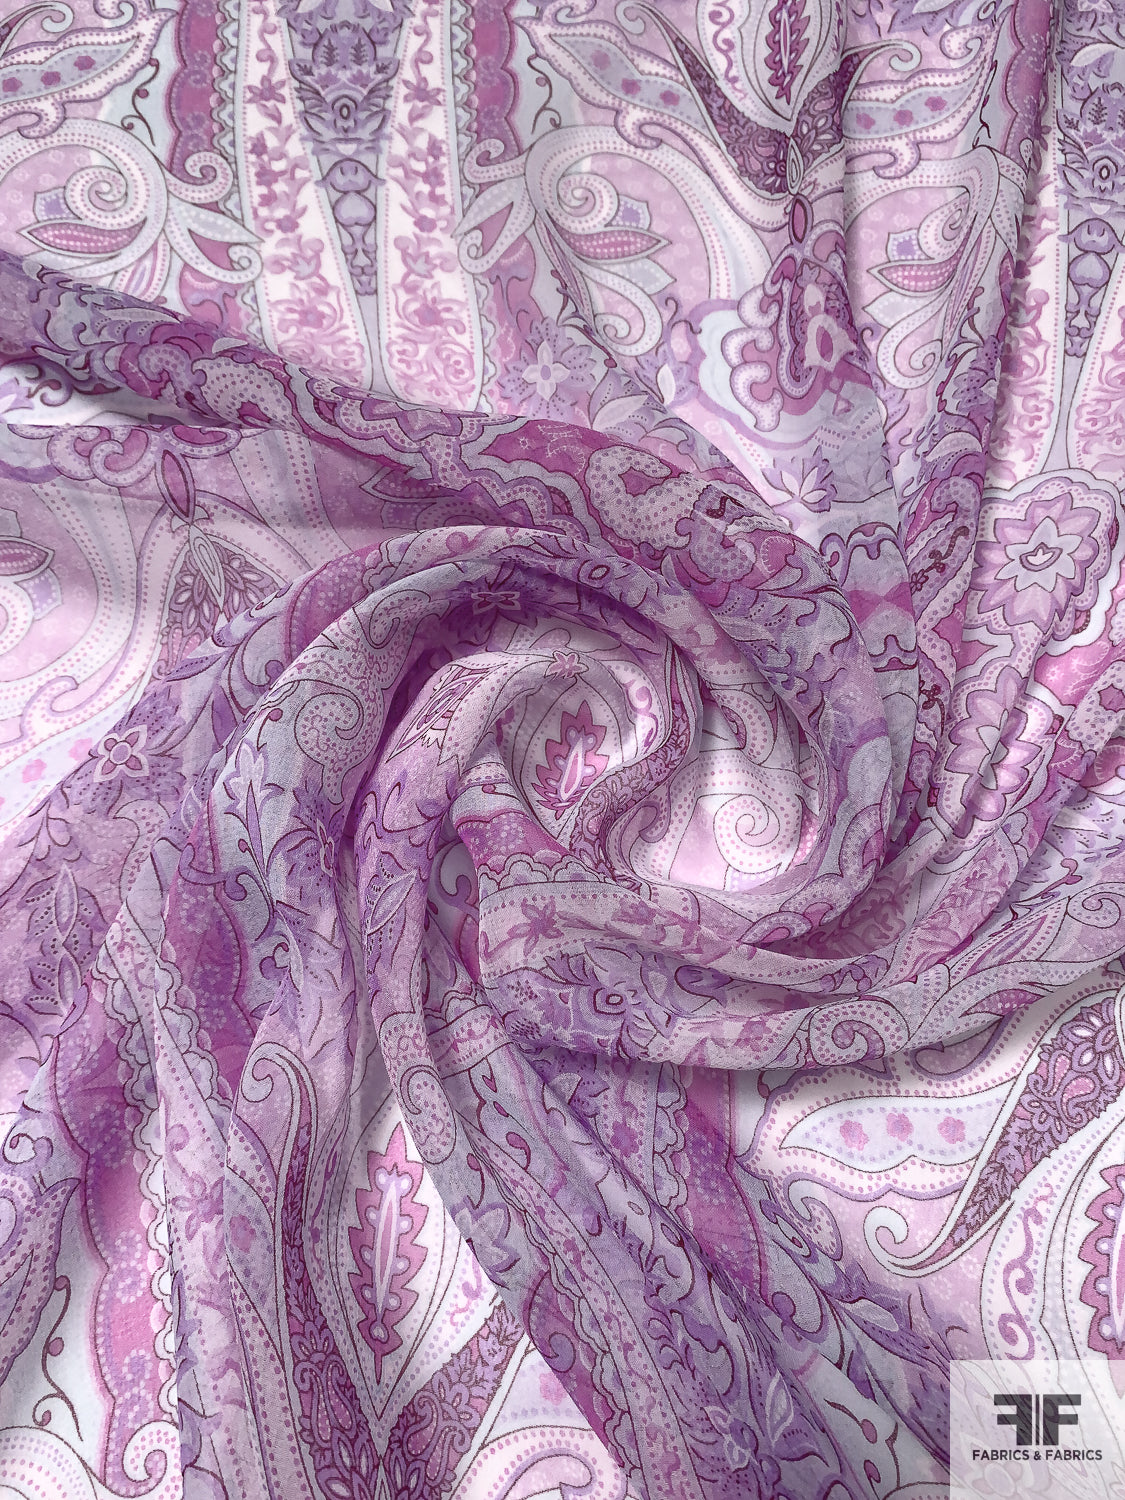 Paisley Vases Printed Silk Chiffon - Orchid Pink / Lavender / Sky Blue / Off-White